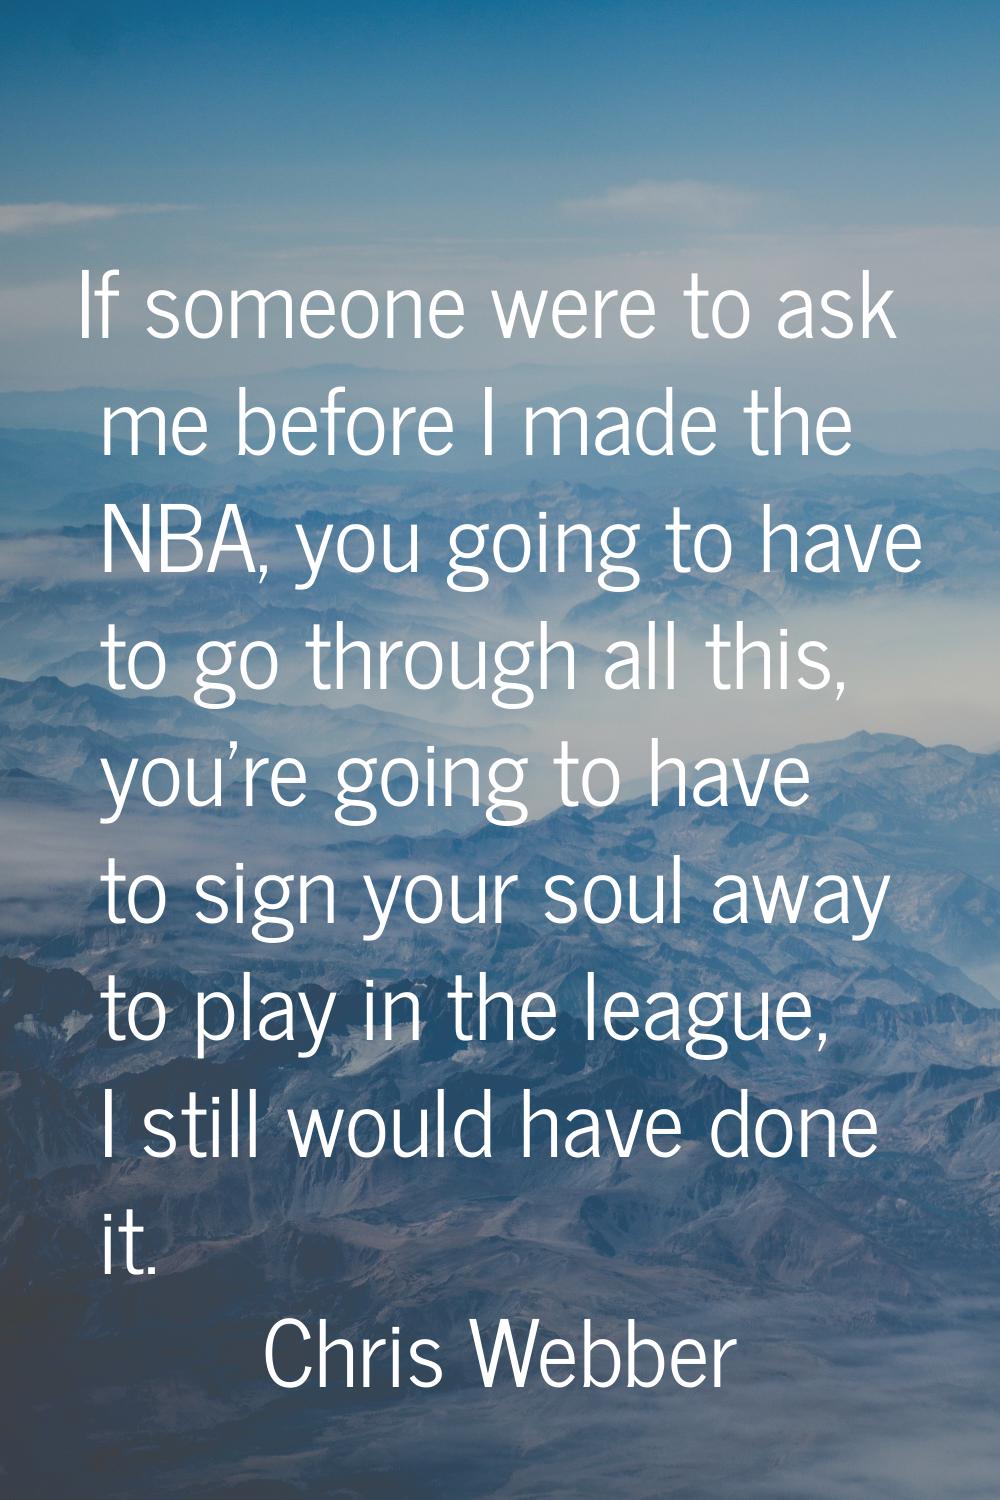 If someone were to ask me before I made the NBA, you going to have to go through all this, you're g